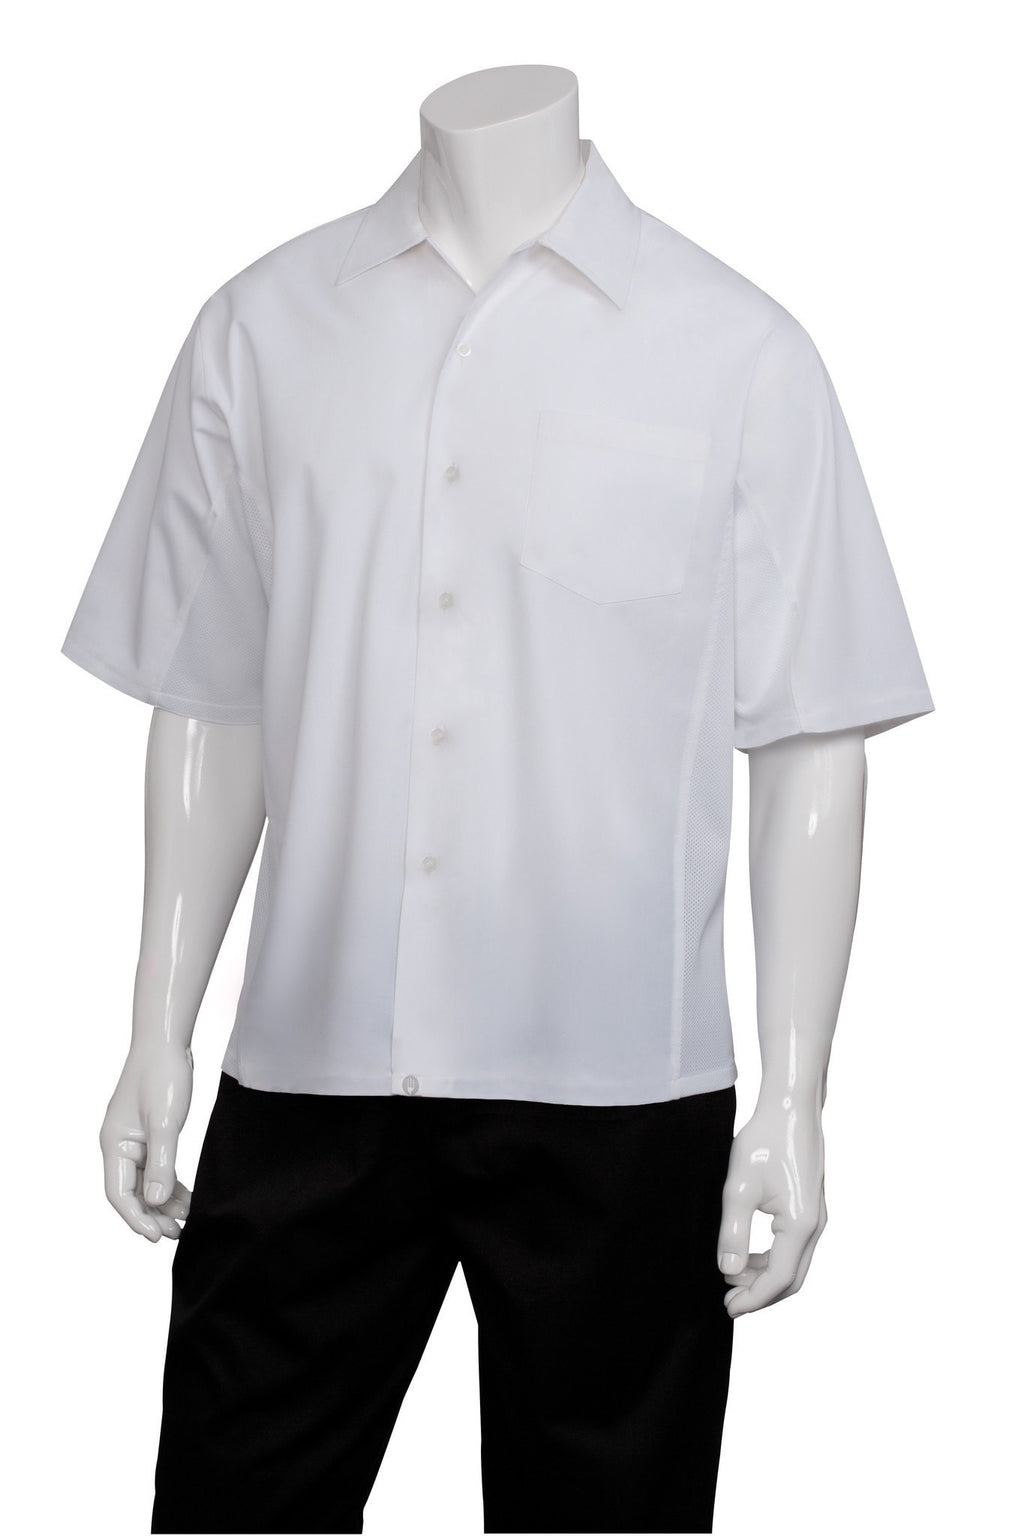 Cool Vent Cook Shirt by Chef Works White Front